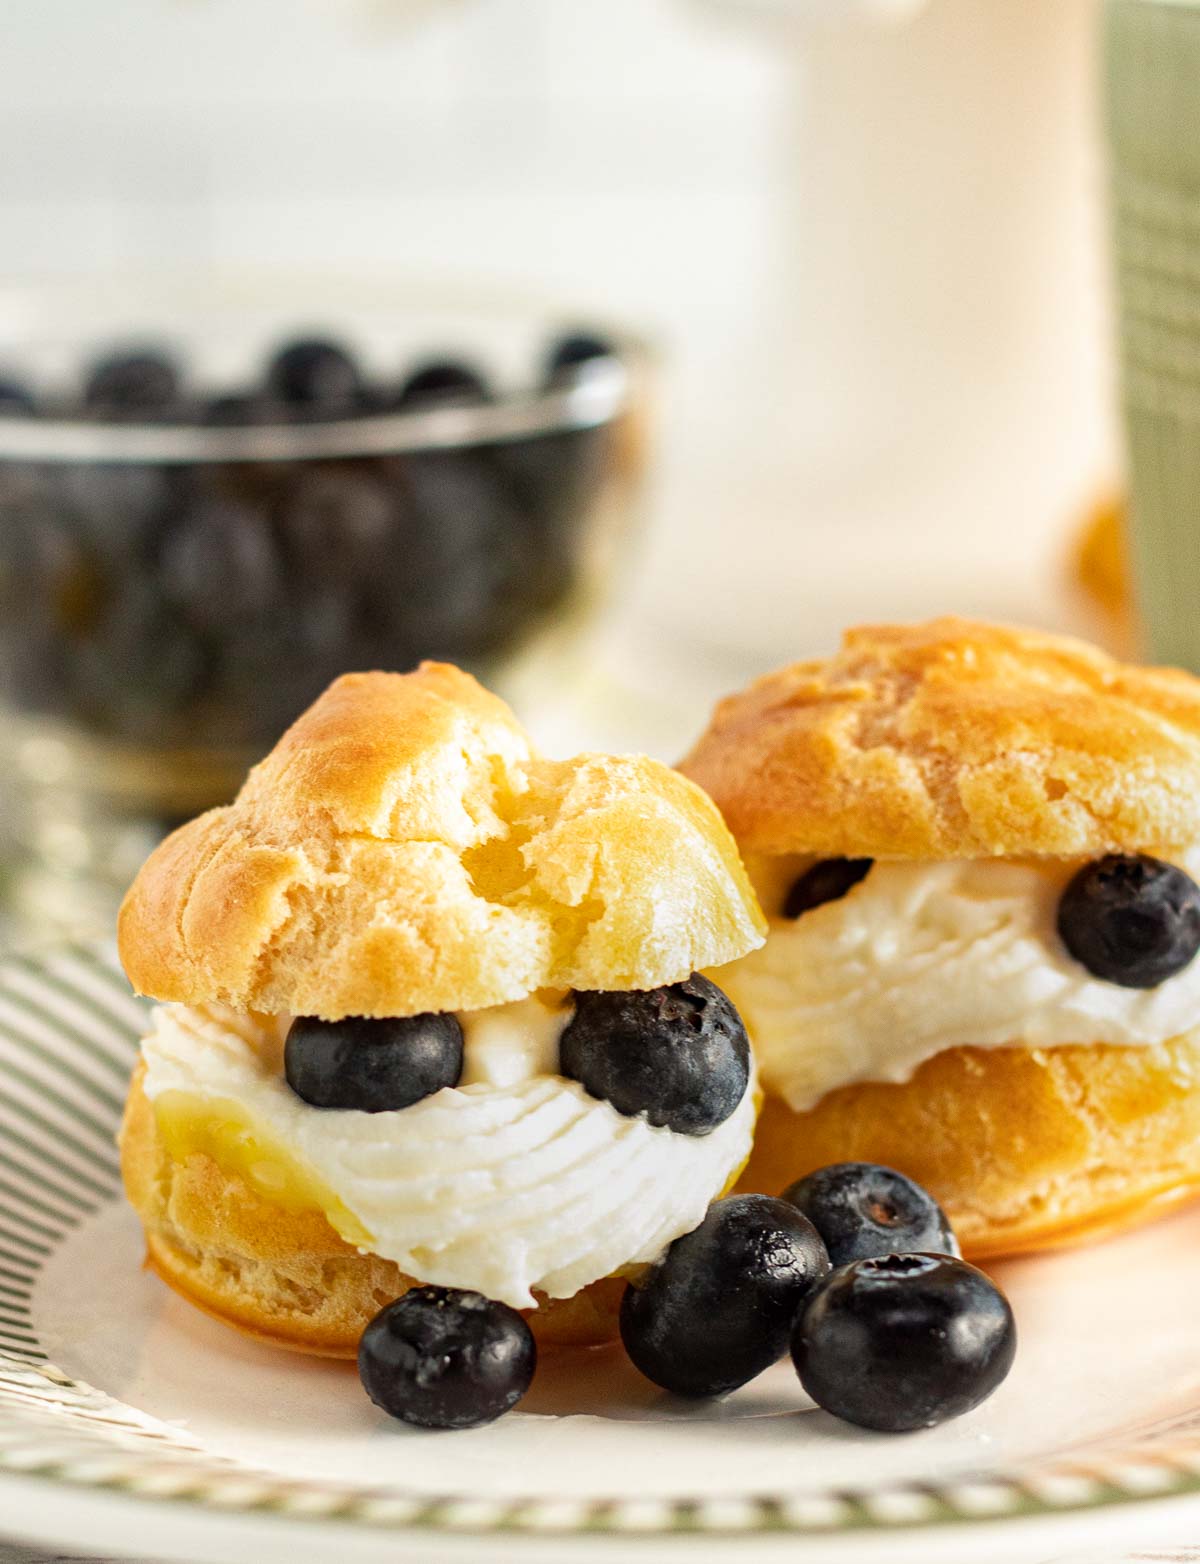 Cream puffs with lemon curd and cream cheese icing on a plate.